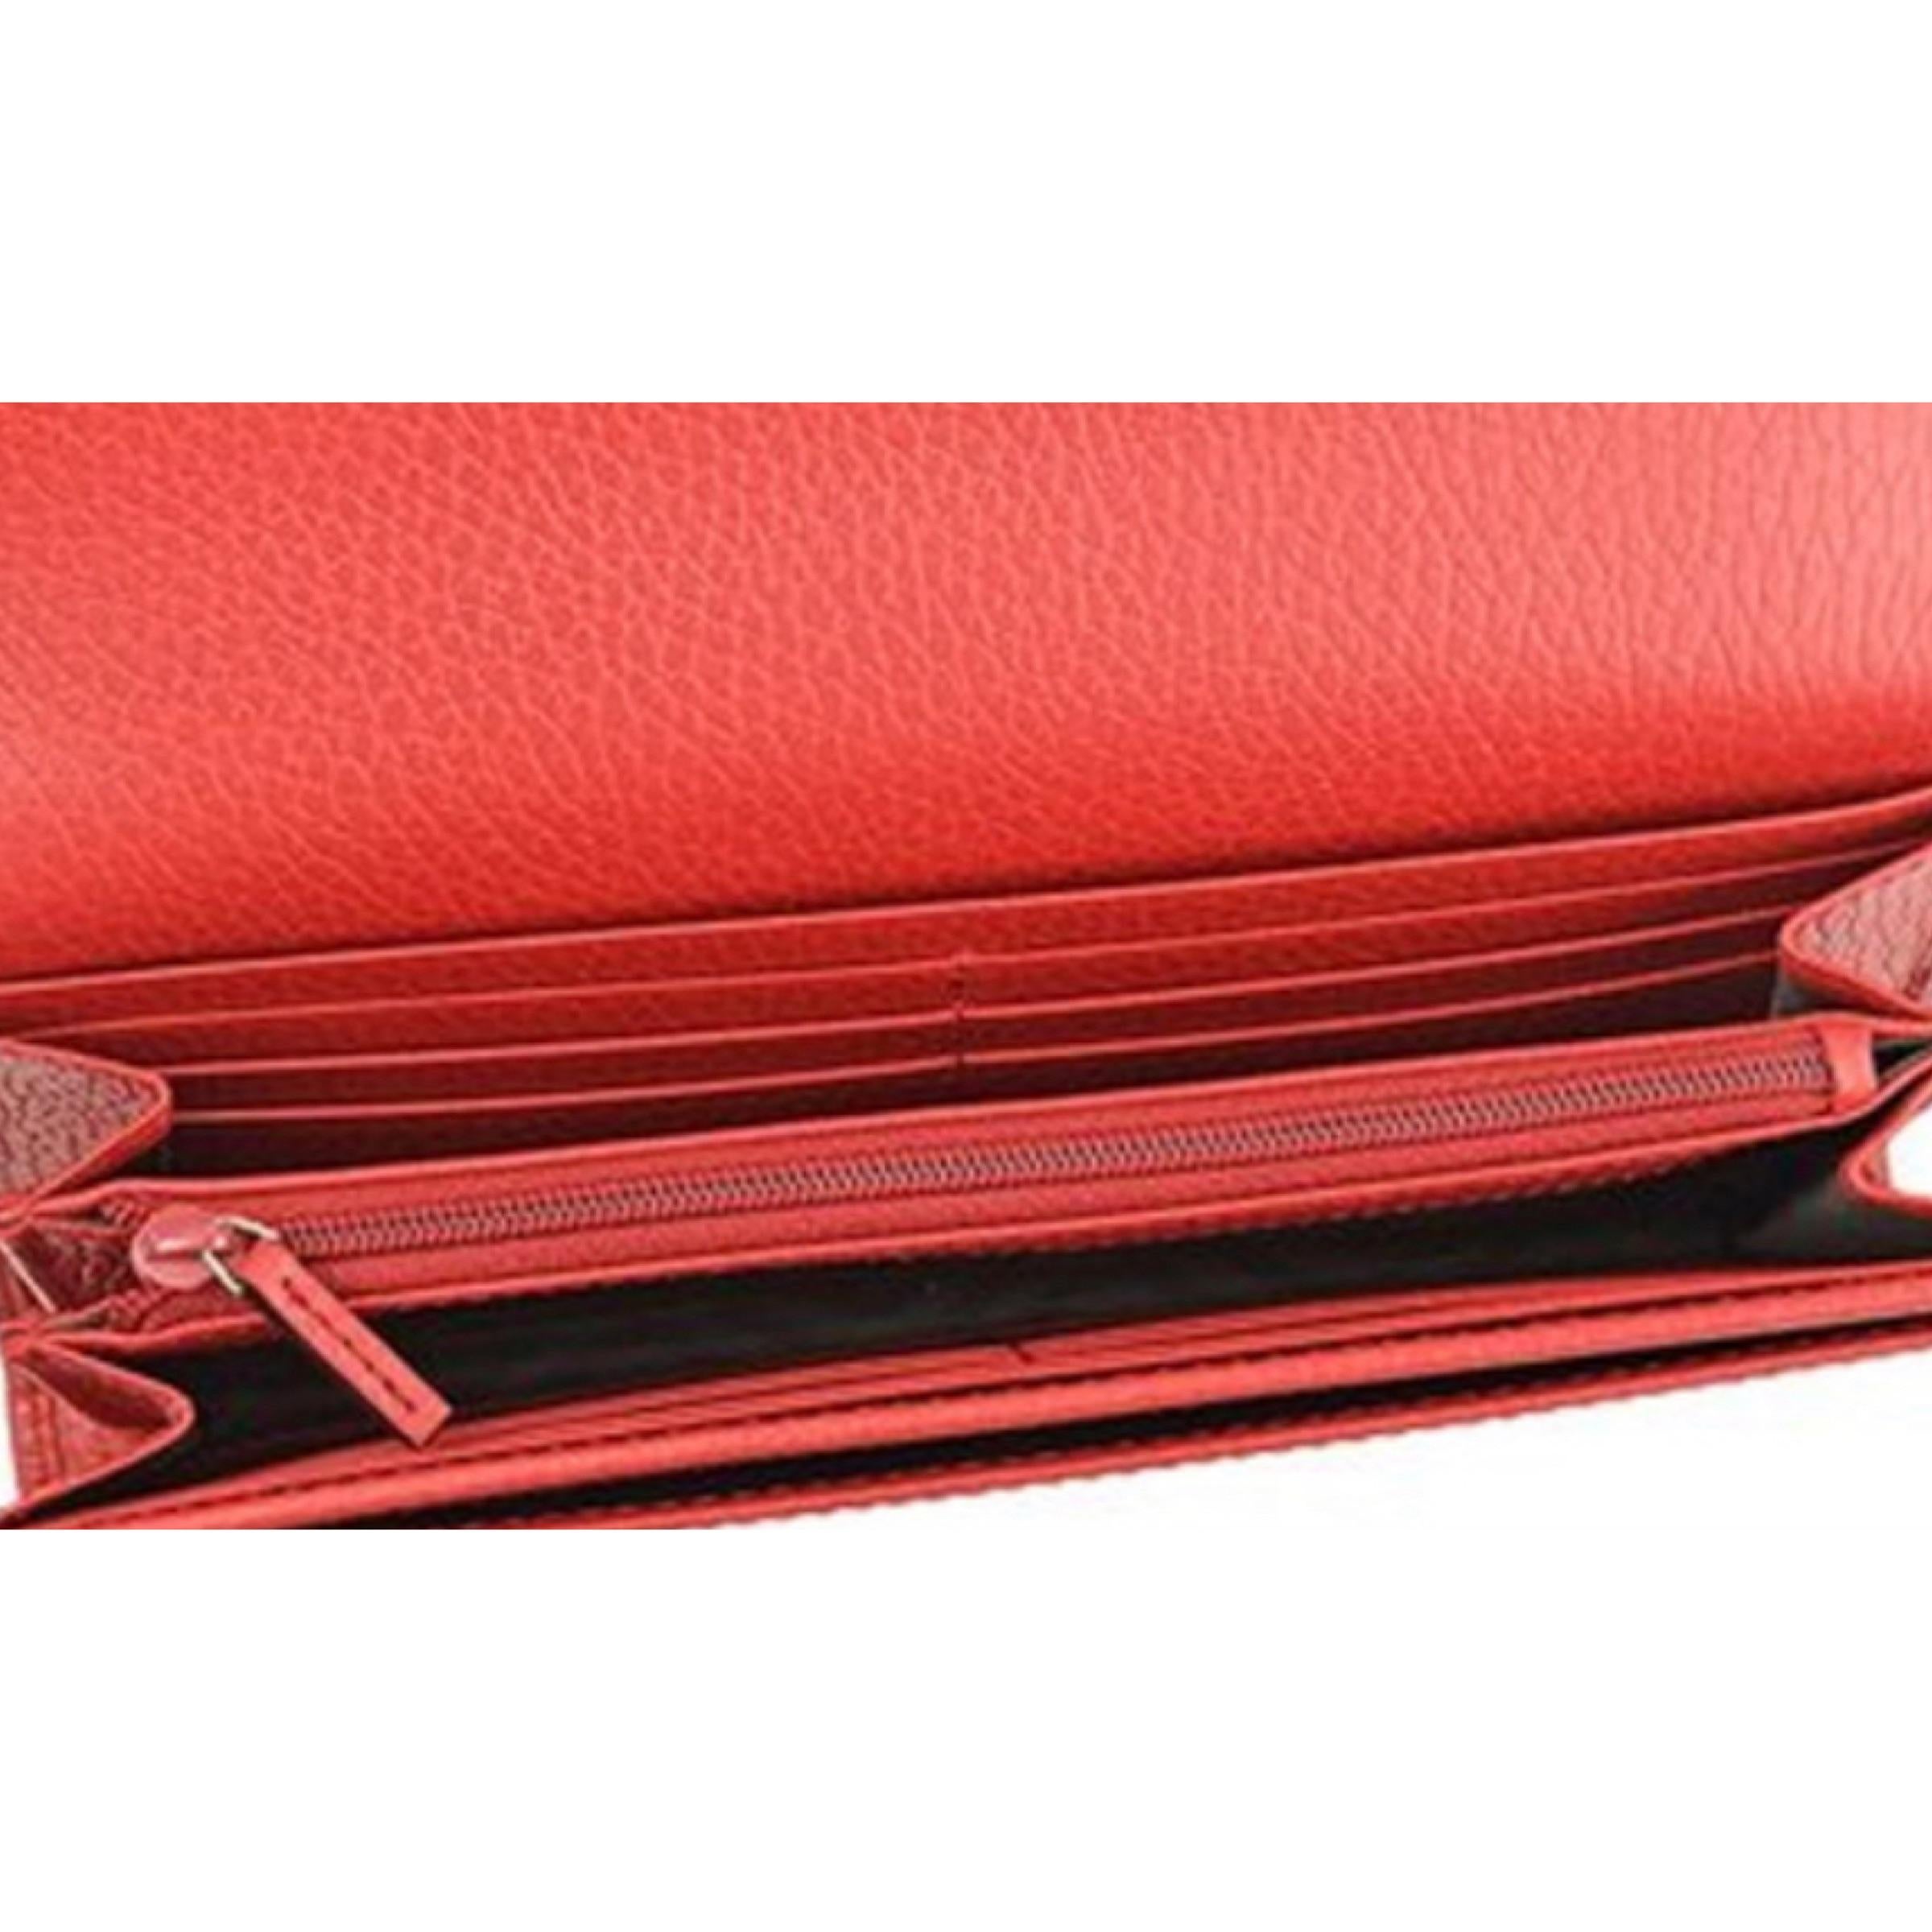 NEW Gucci Red Interlocking G Leather Long Wallet Clutch Bag For Sale 3